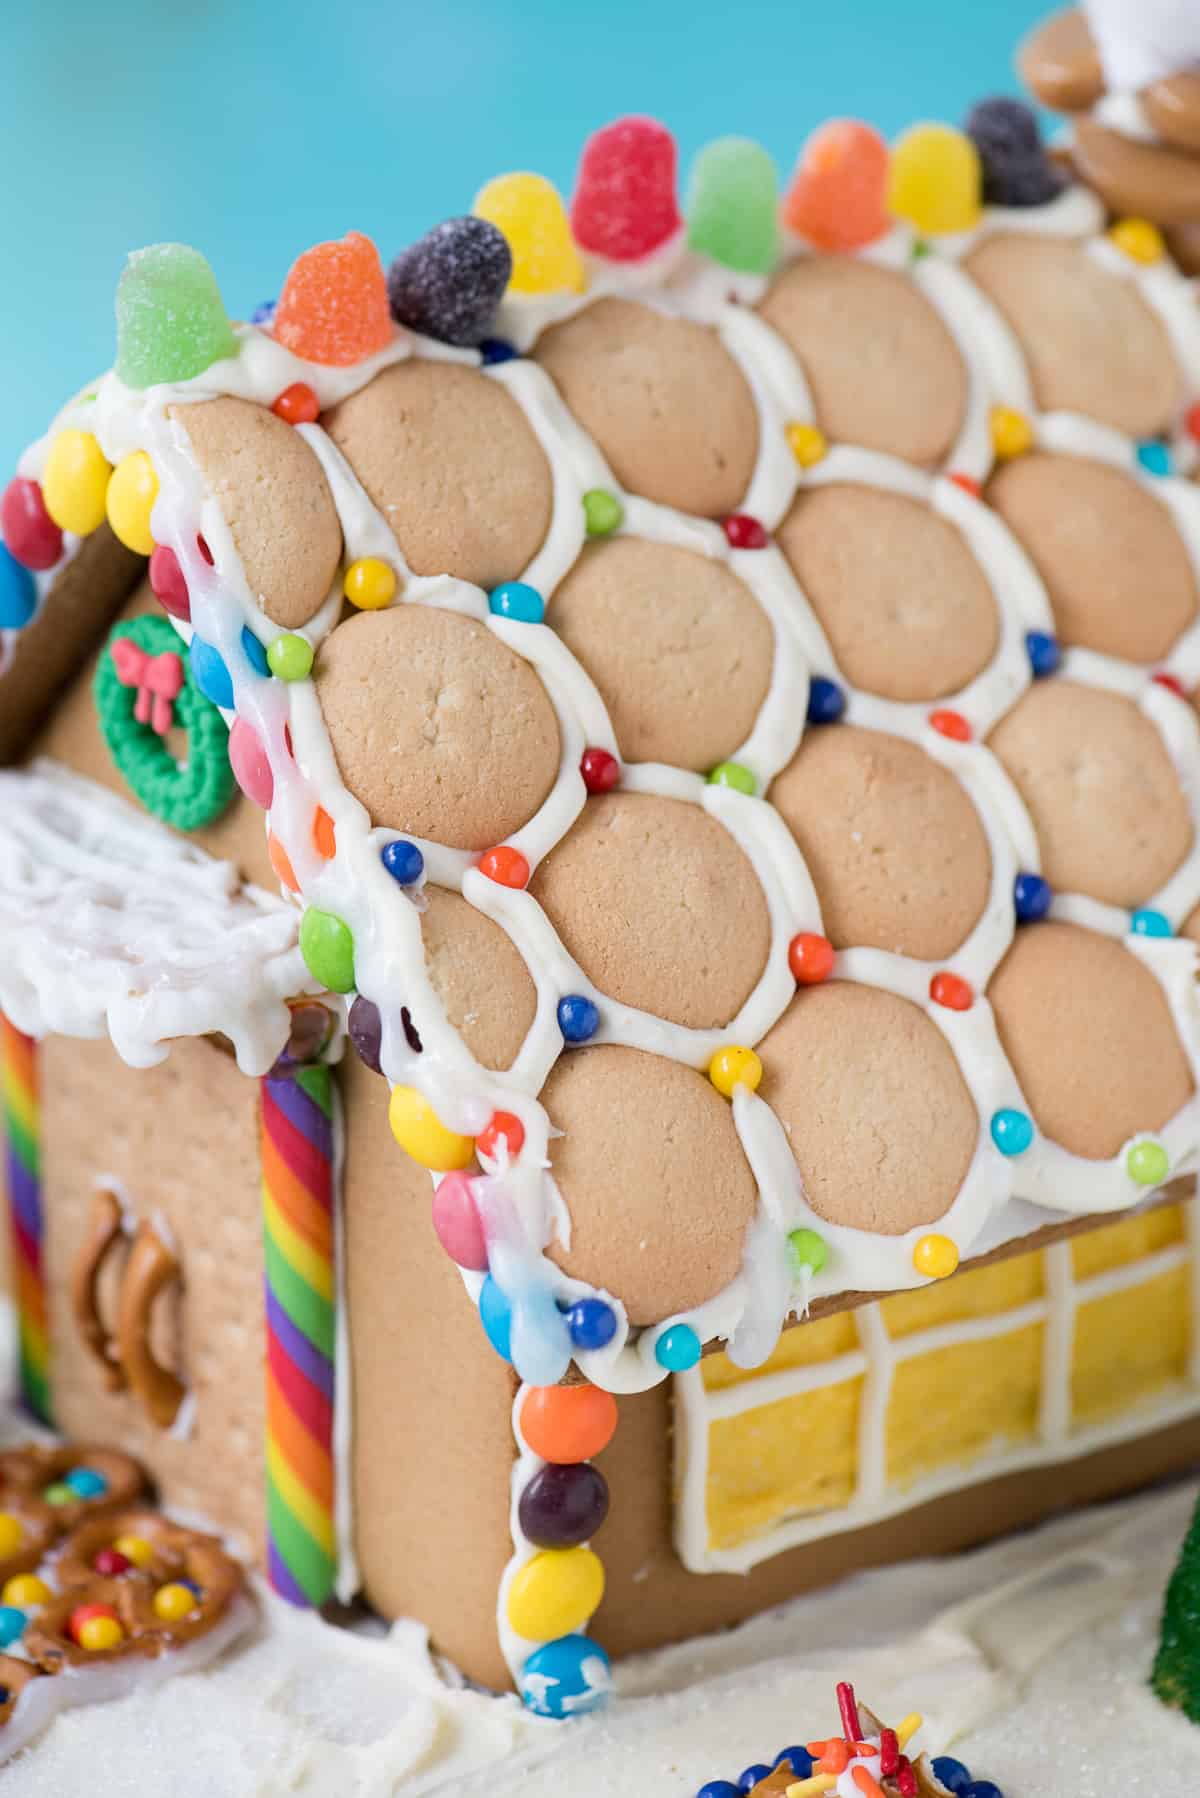 Get some inspiration for your holiday gingerbread house decorating with our gingerbread house tutorial and VIDEO! 